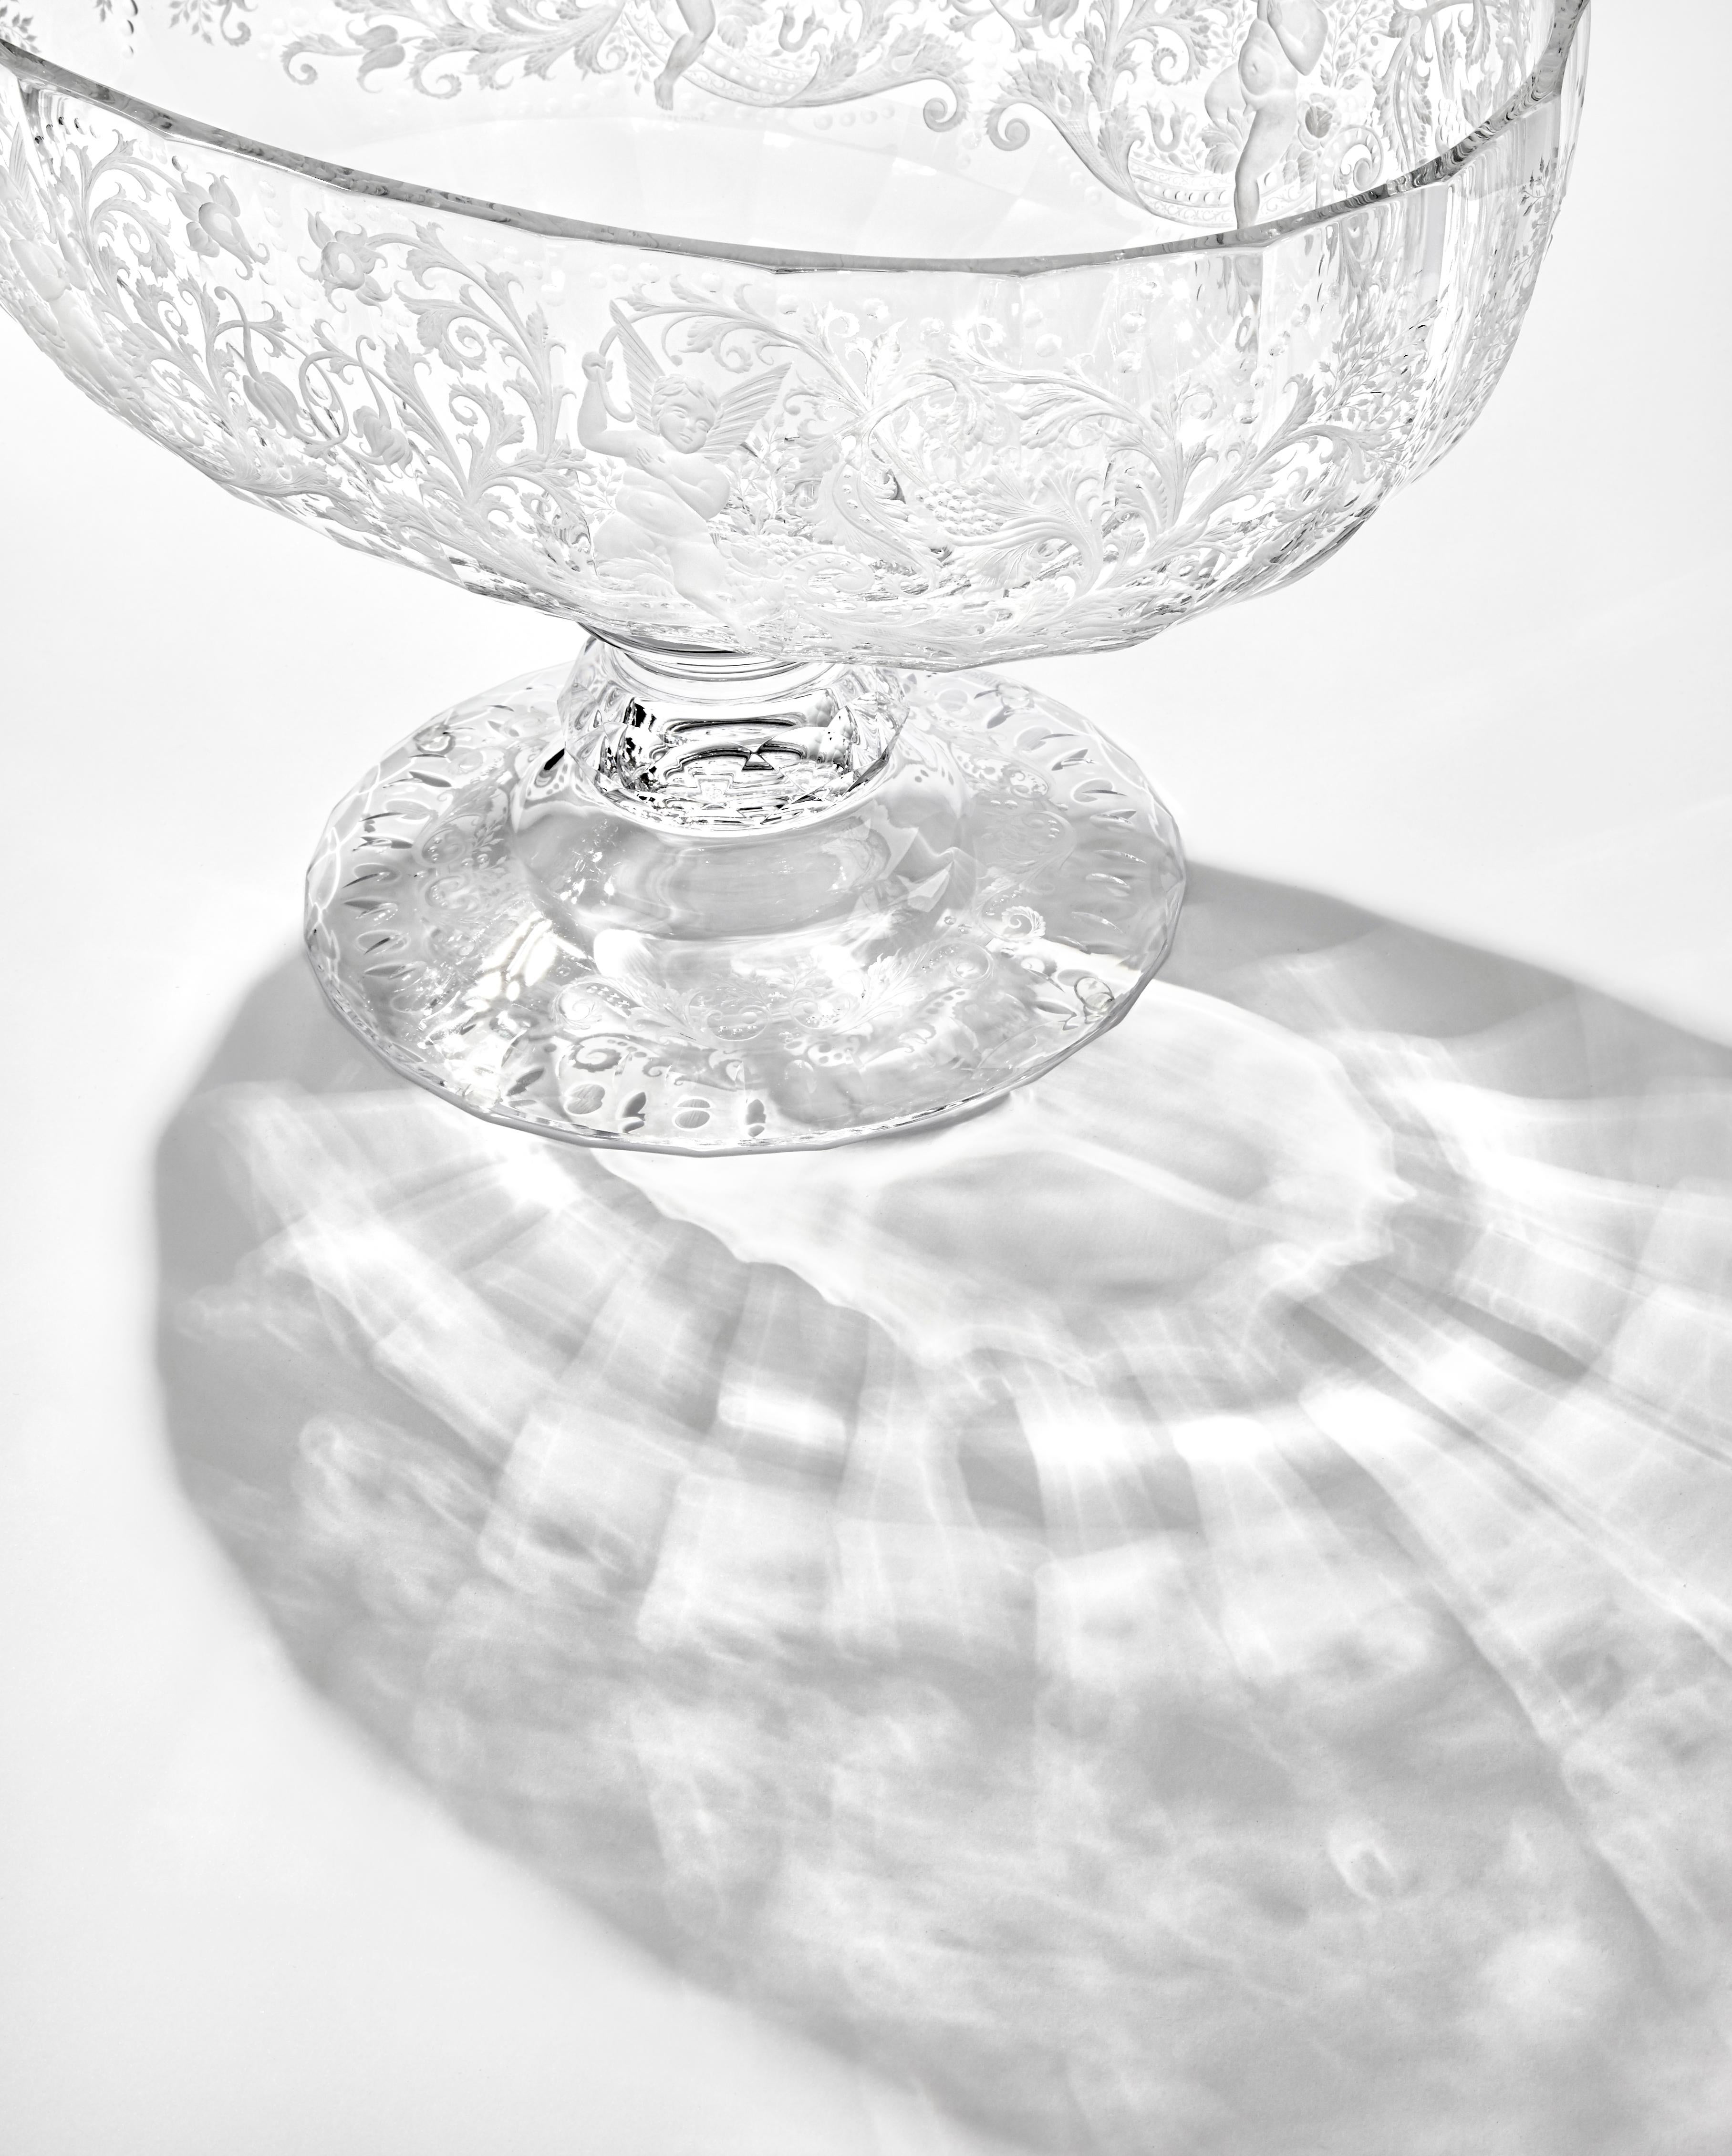 Baroque Maria Theresa Clear Bowl Hand Engraved Marie Theresa Motif  For Sale